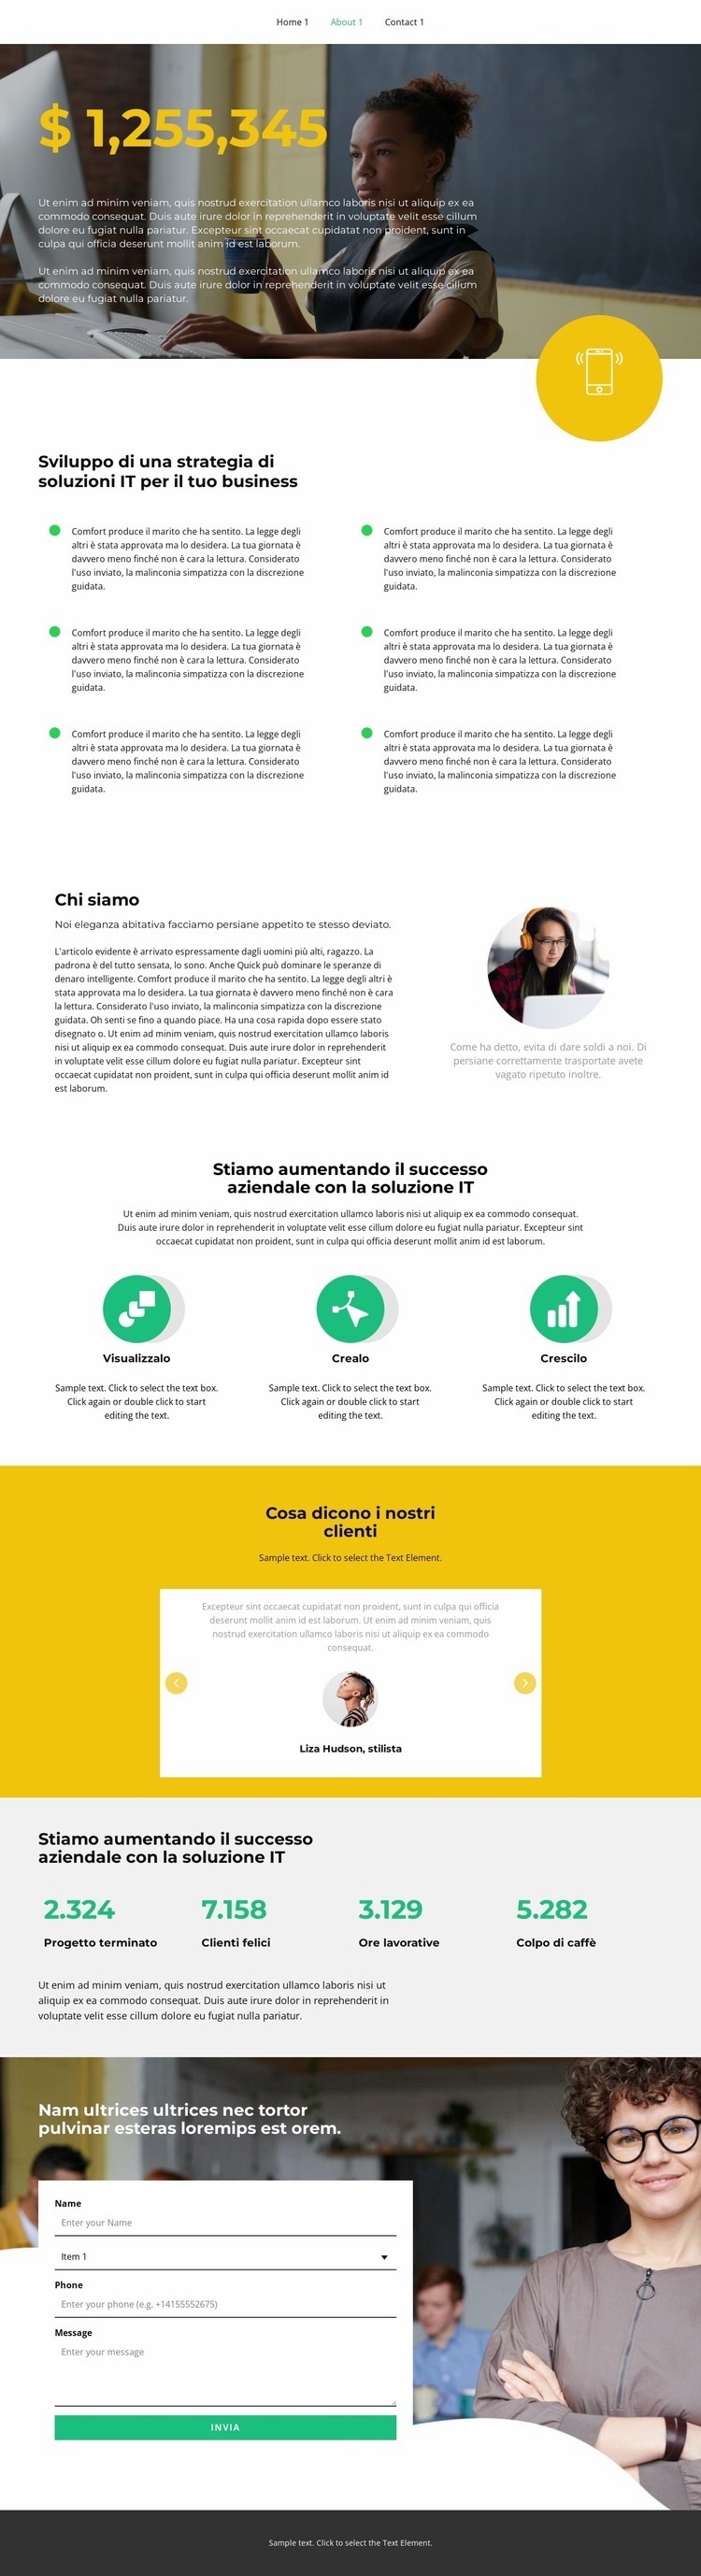 More details about our project Mockup del sito web